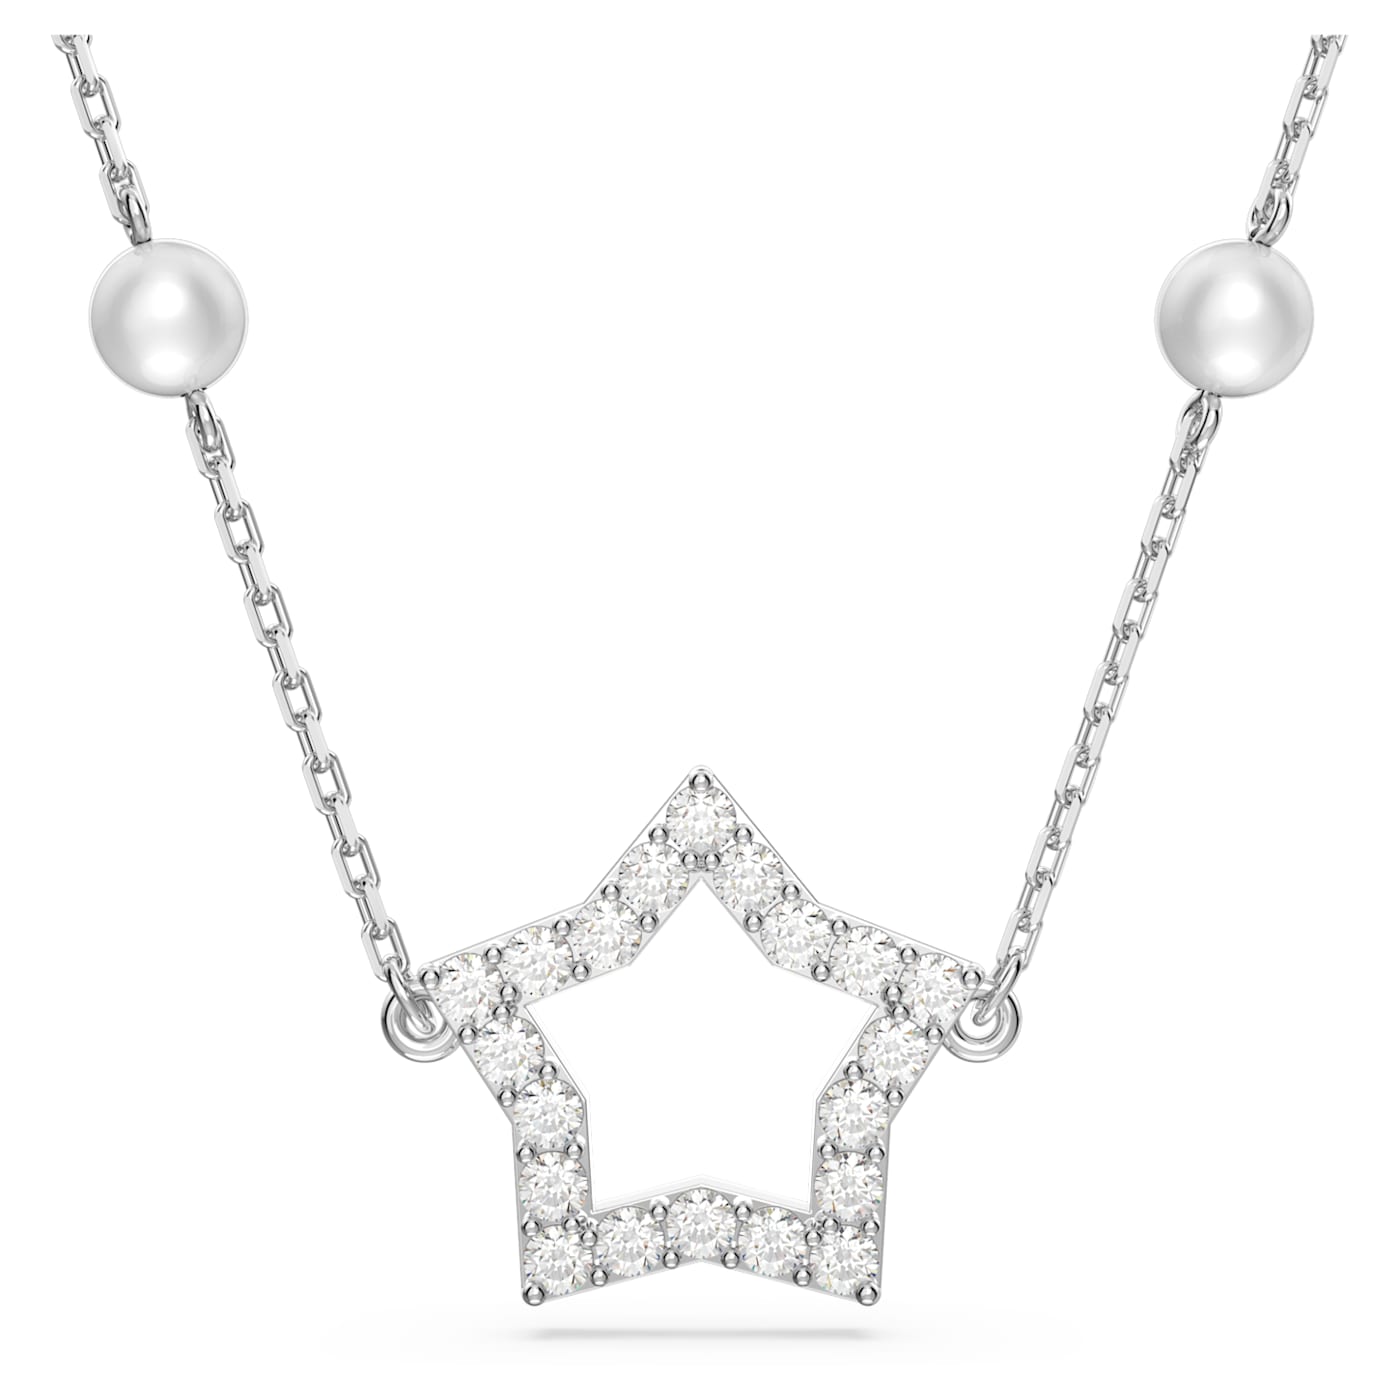 STELLA NECKLACE, PEARL, STAR, RHODIUM PLATED